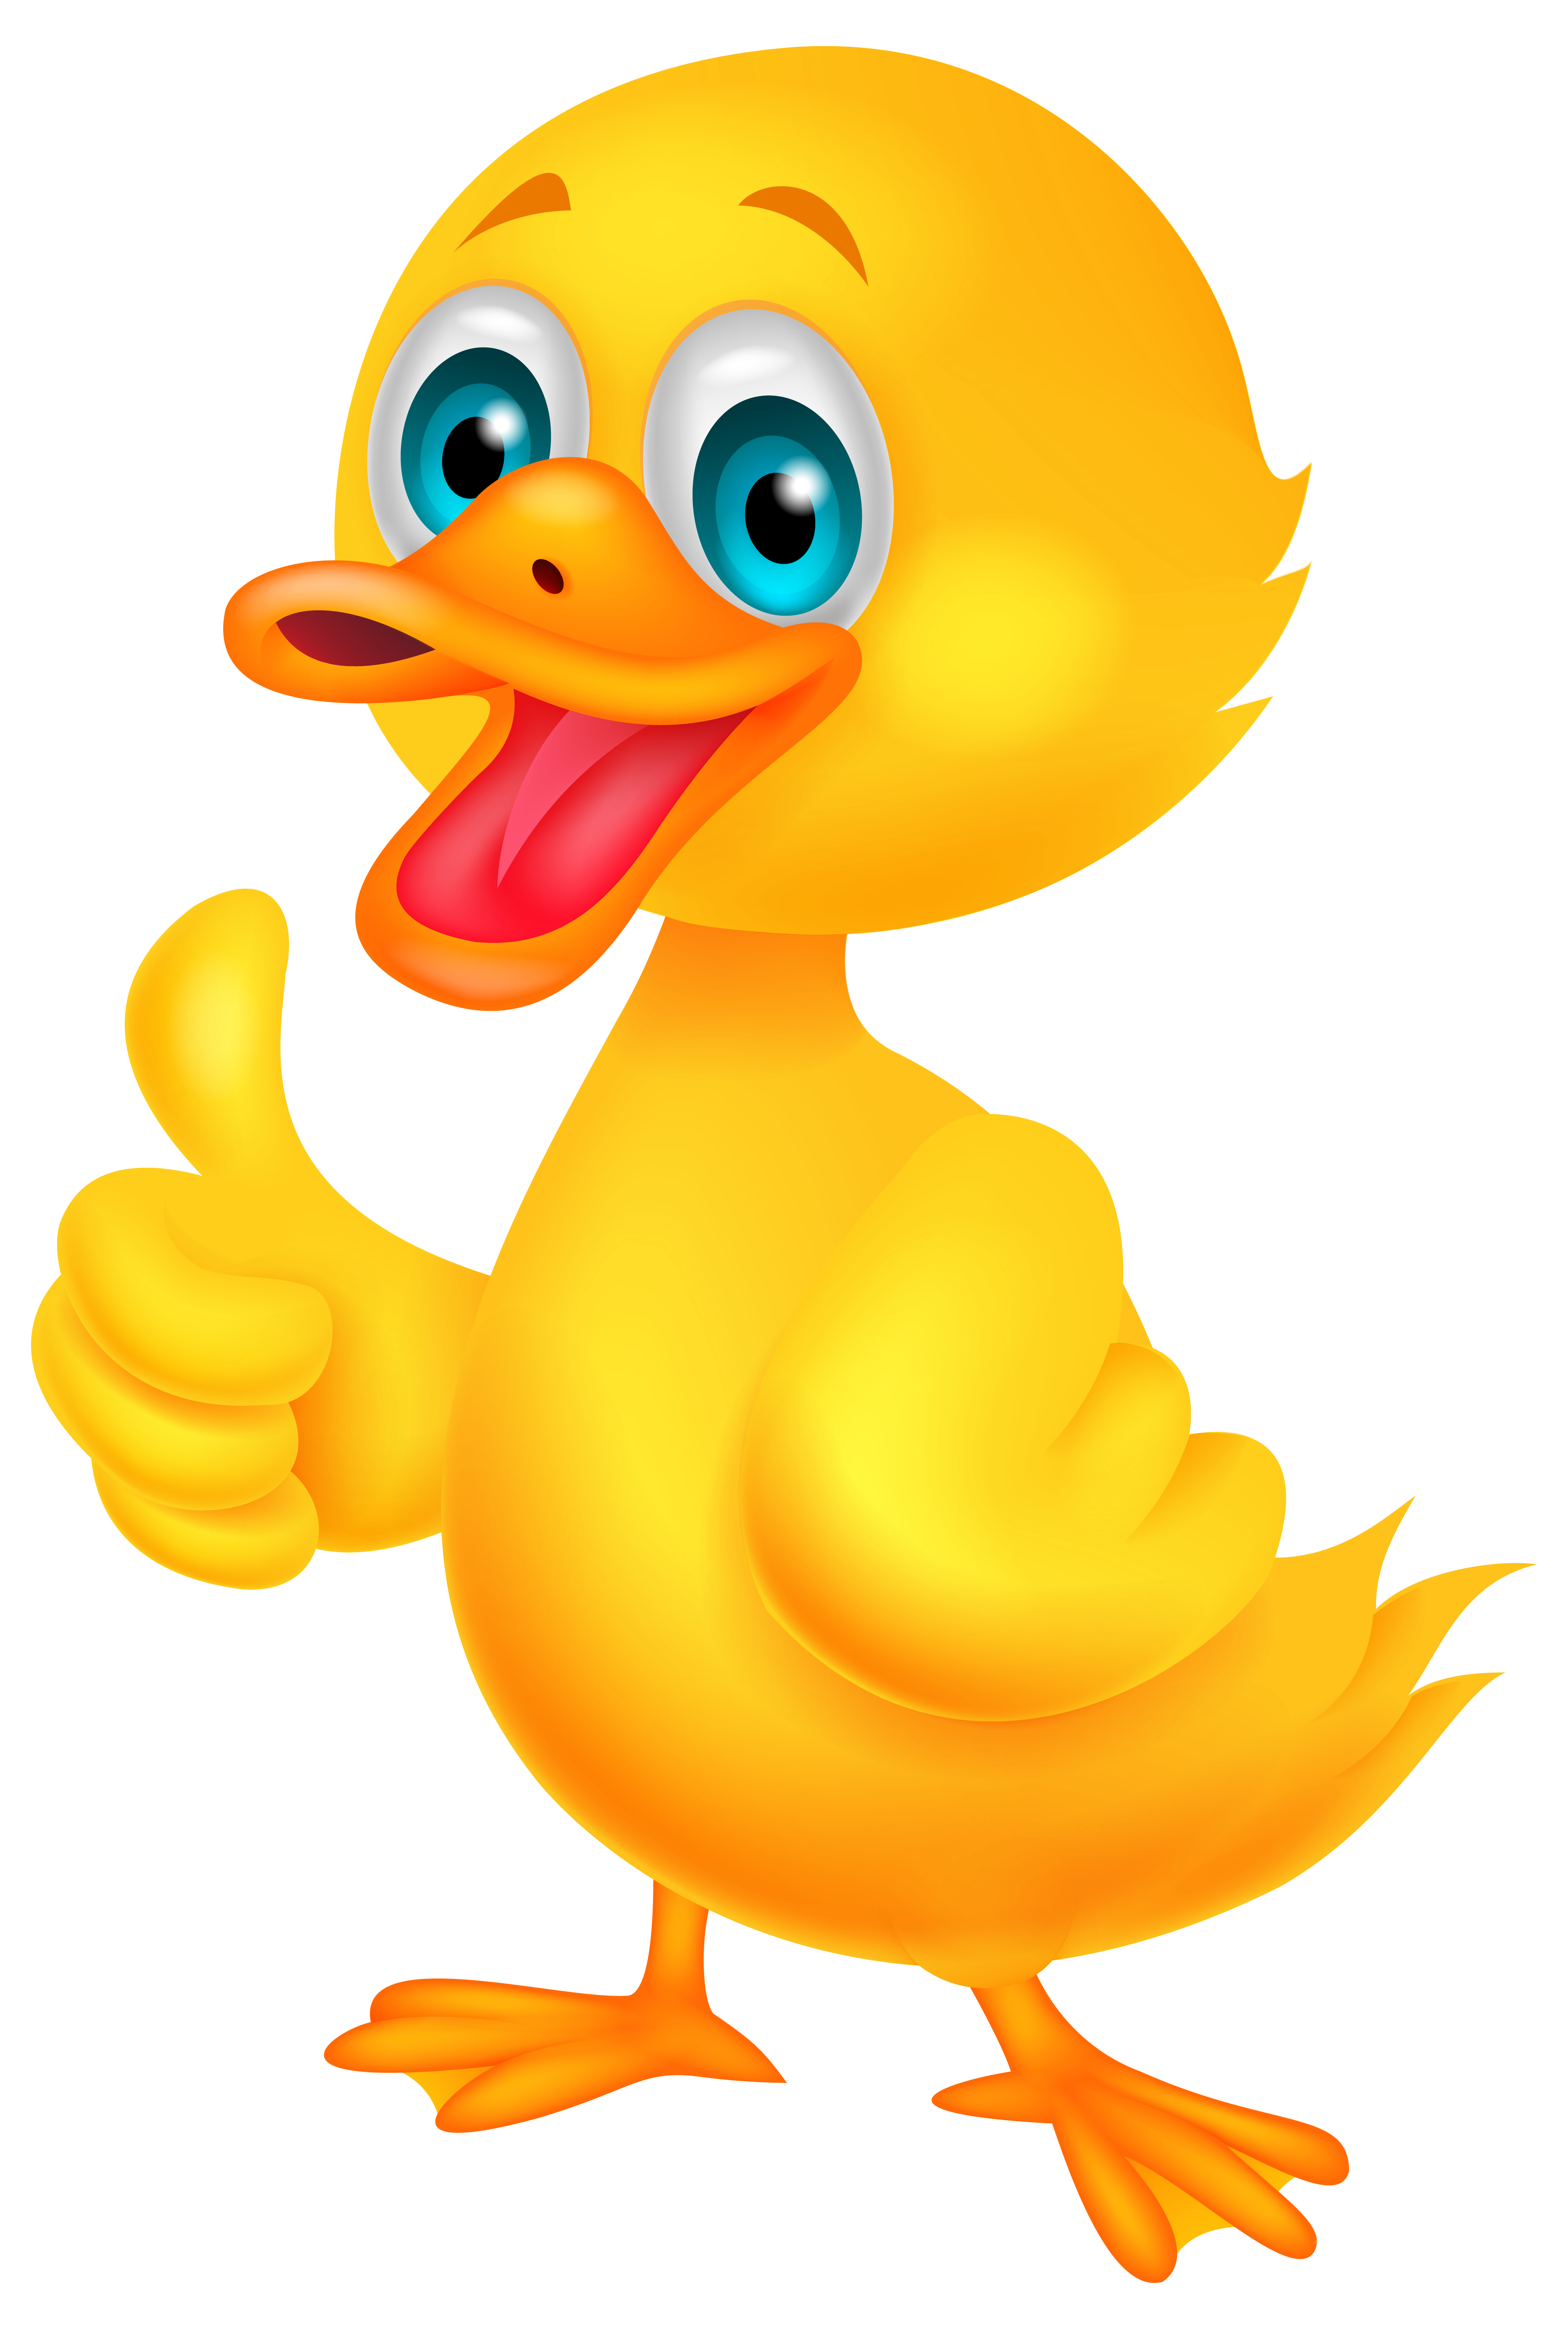 yellow duck clipart. Size: 82